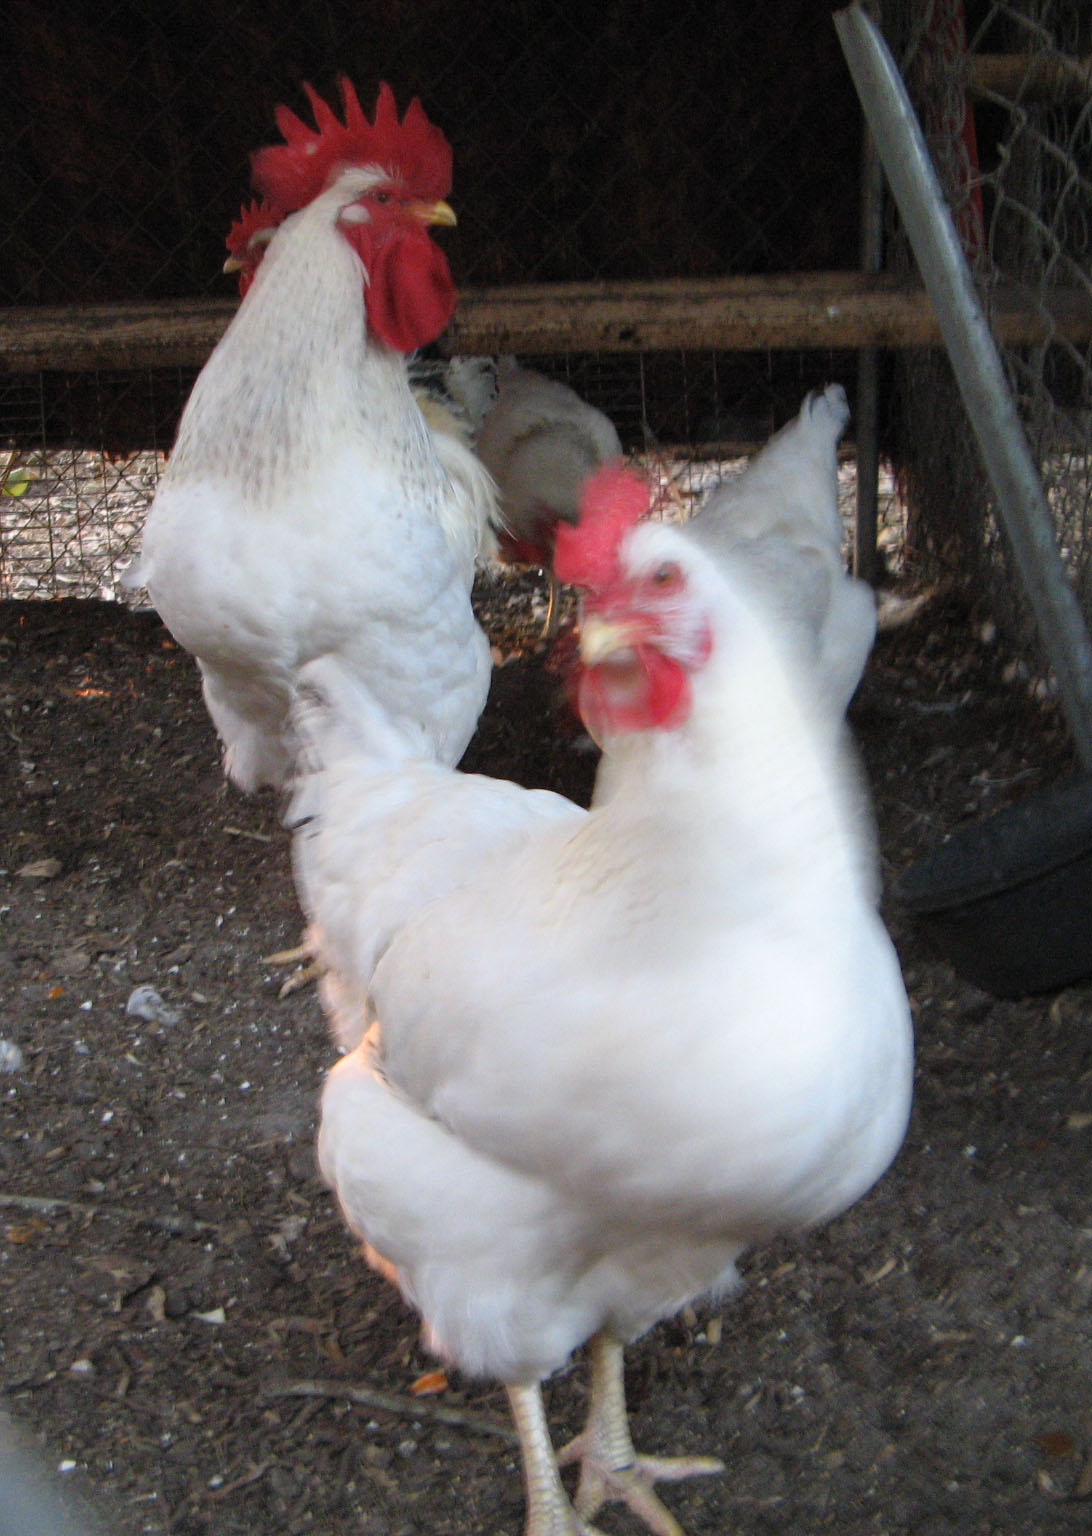 The Delawares at 7 months.  The pullets are laying daily and have developed good size.